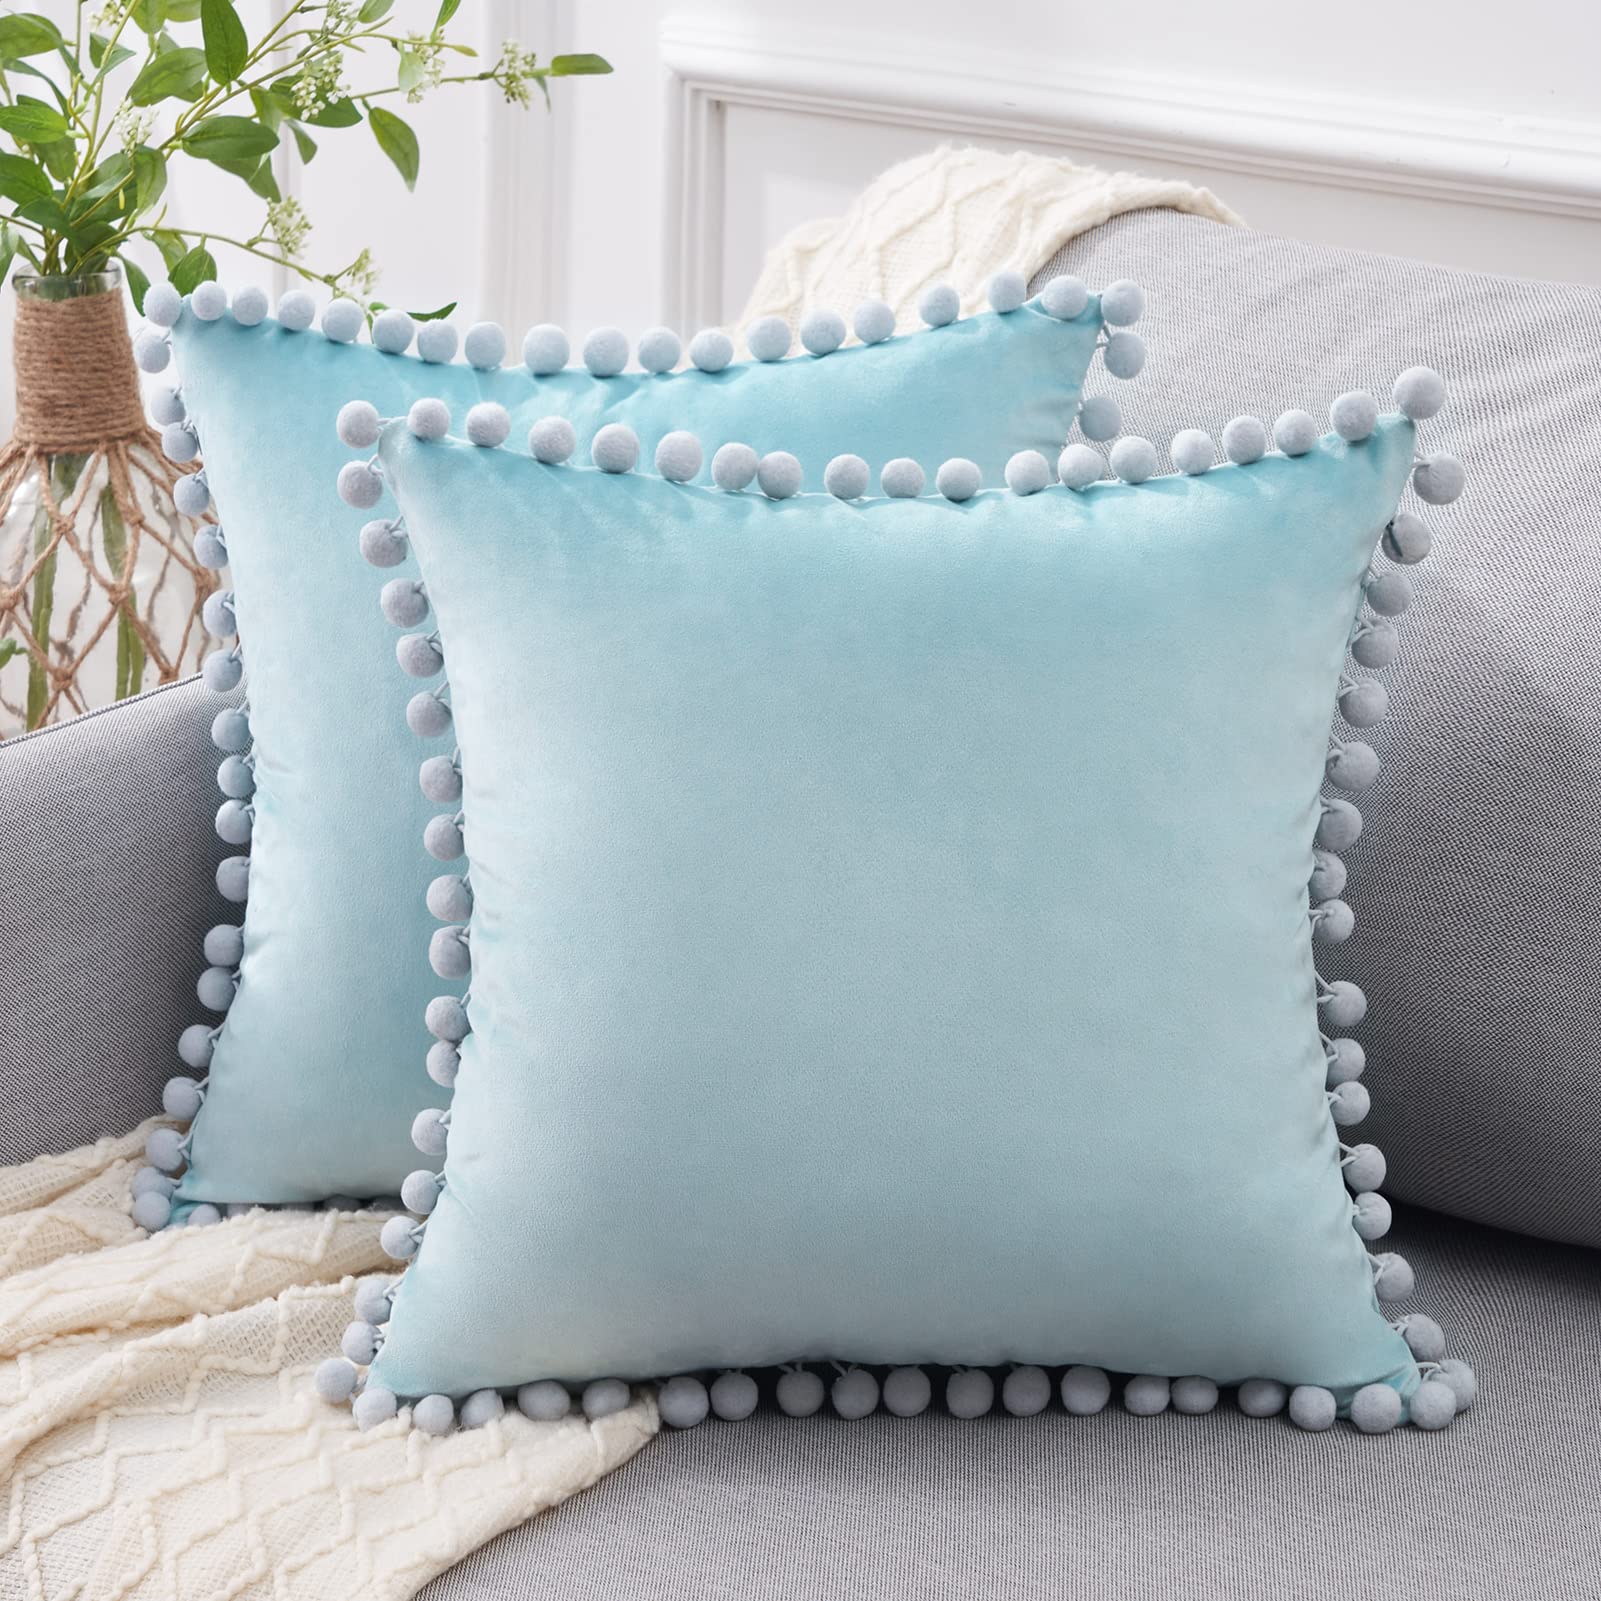 Book Cover Top Finel Decorative Throw Pillow Covers for Couch Bed Soft Particles Velvet Solid Cushion Covers with Pom-poms 18 x 18 Inch 45 x 45 cm, Pack of 2, Aqua Blue Aqua Blue 18 x 18-Inch